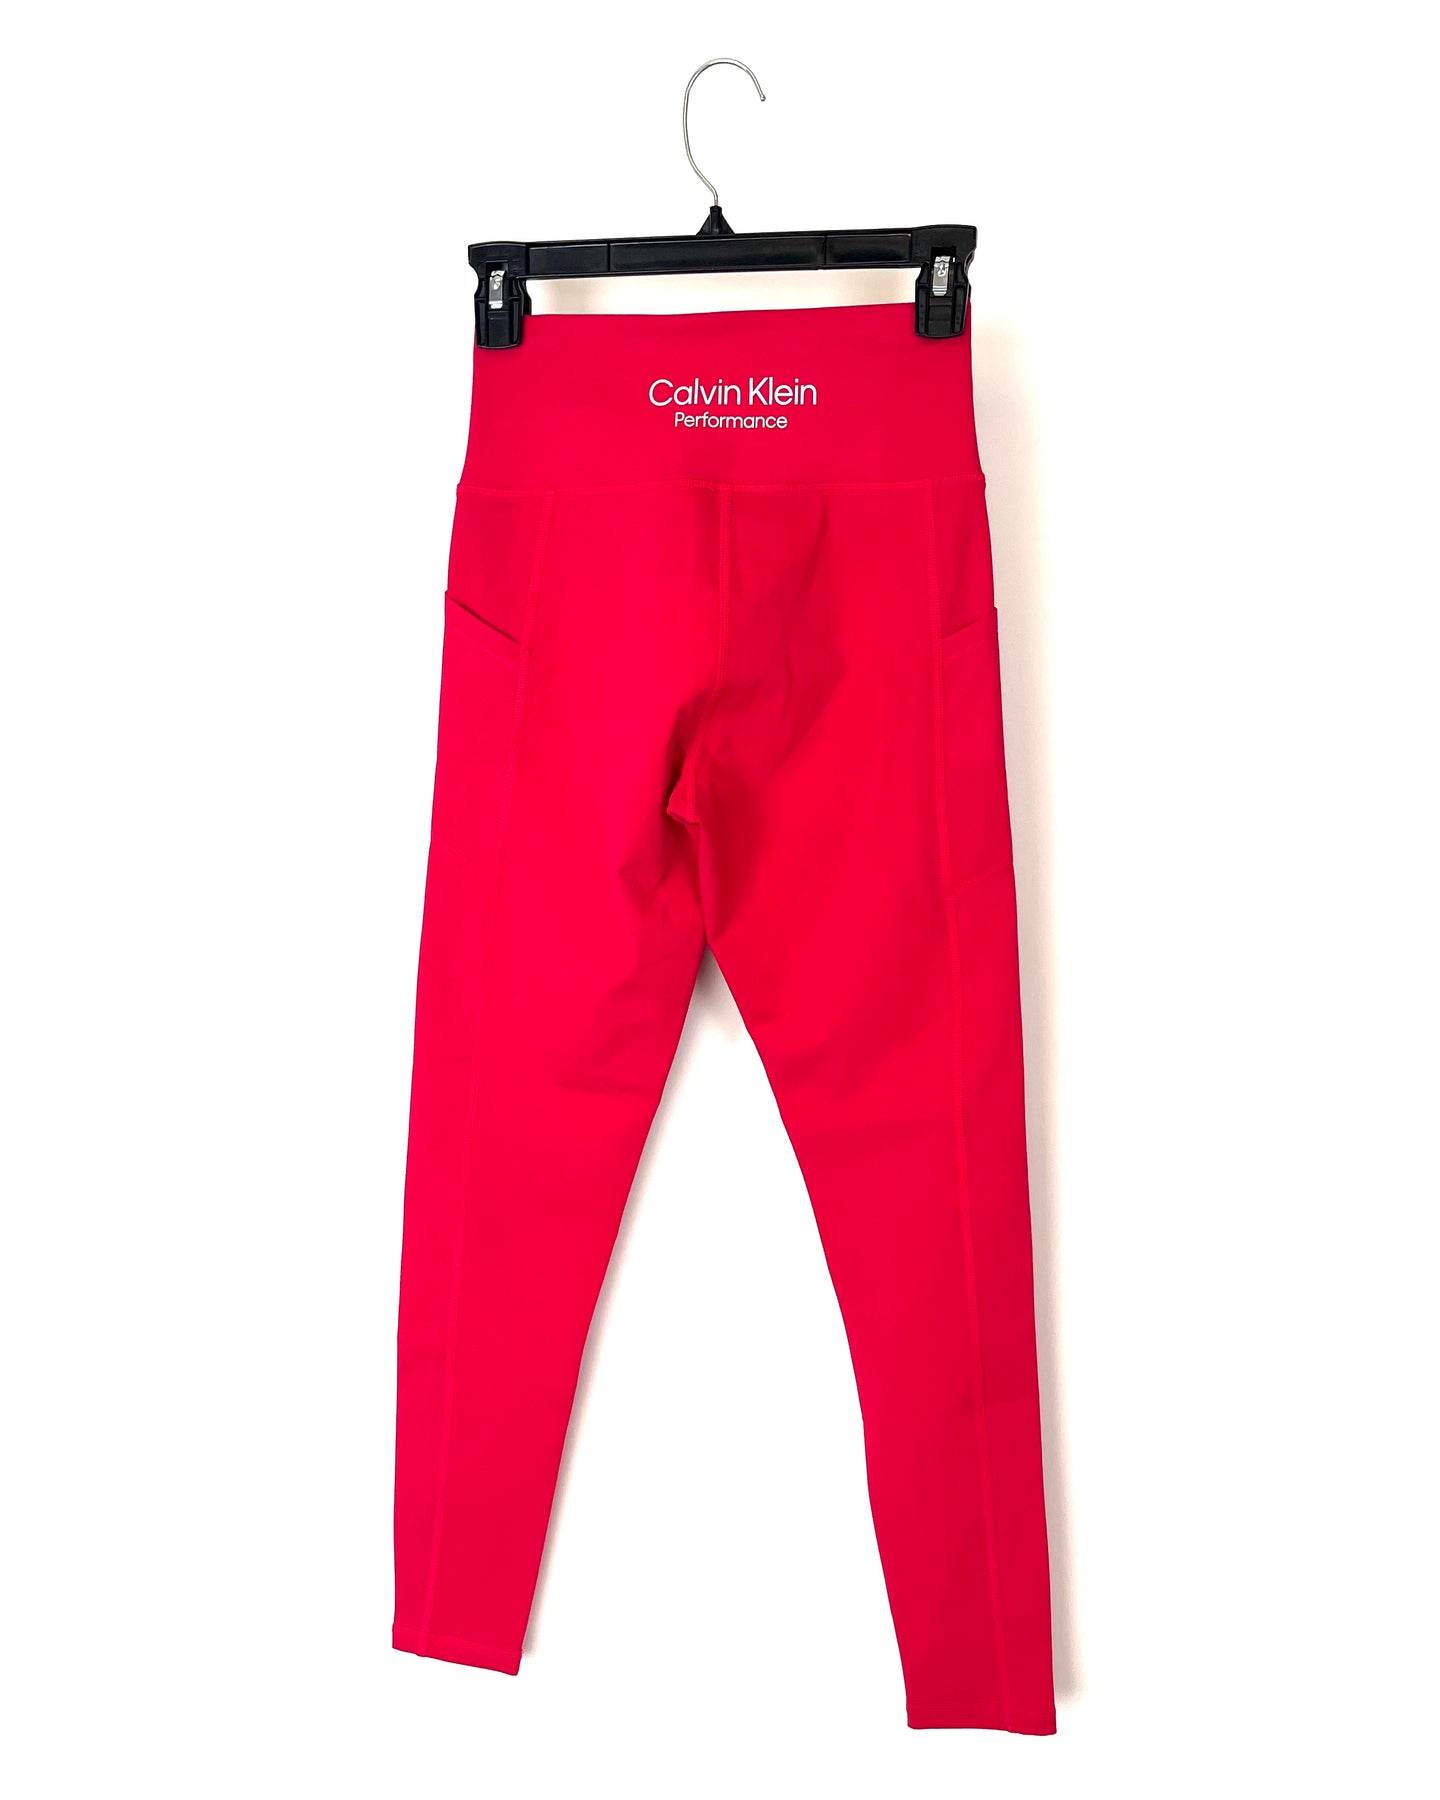 Calvin Klein Hot Pink Activewear Leggings With Pockets - Small